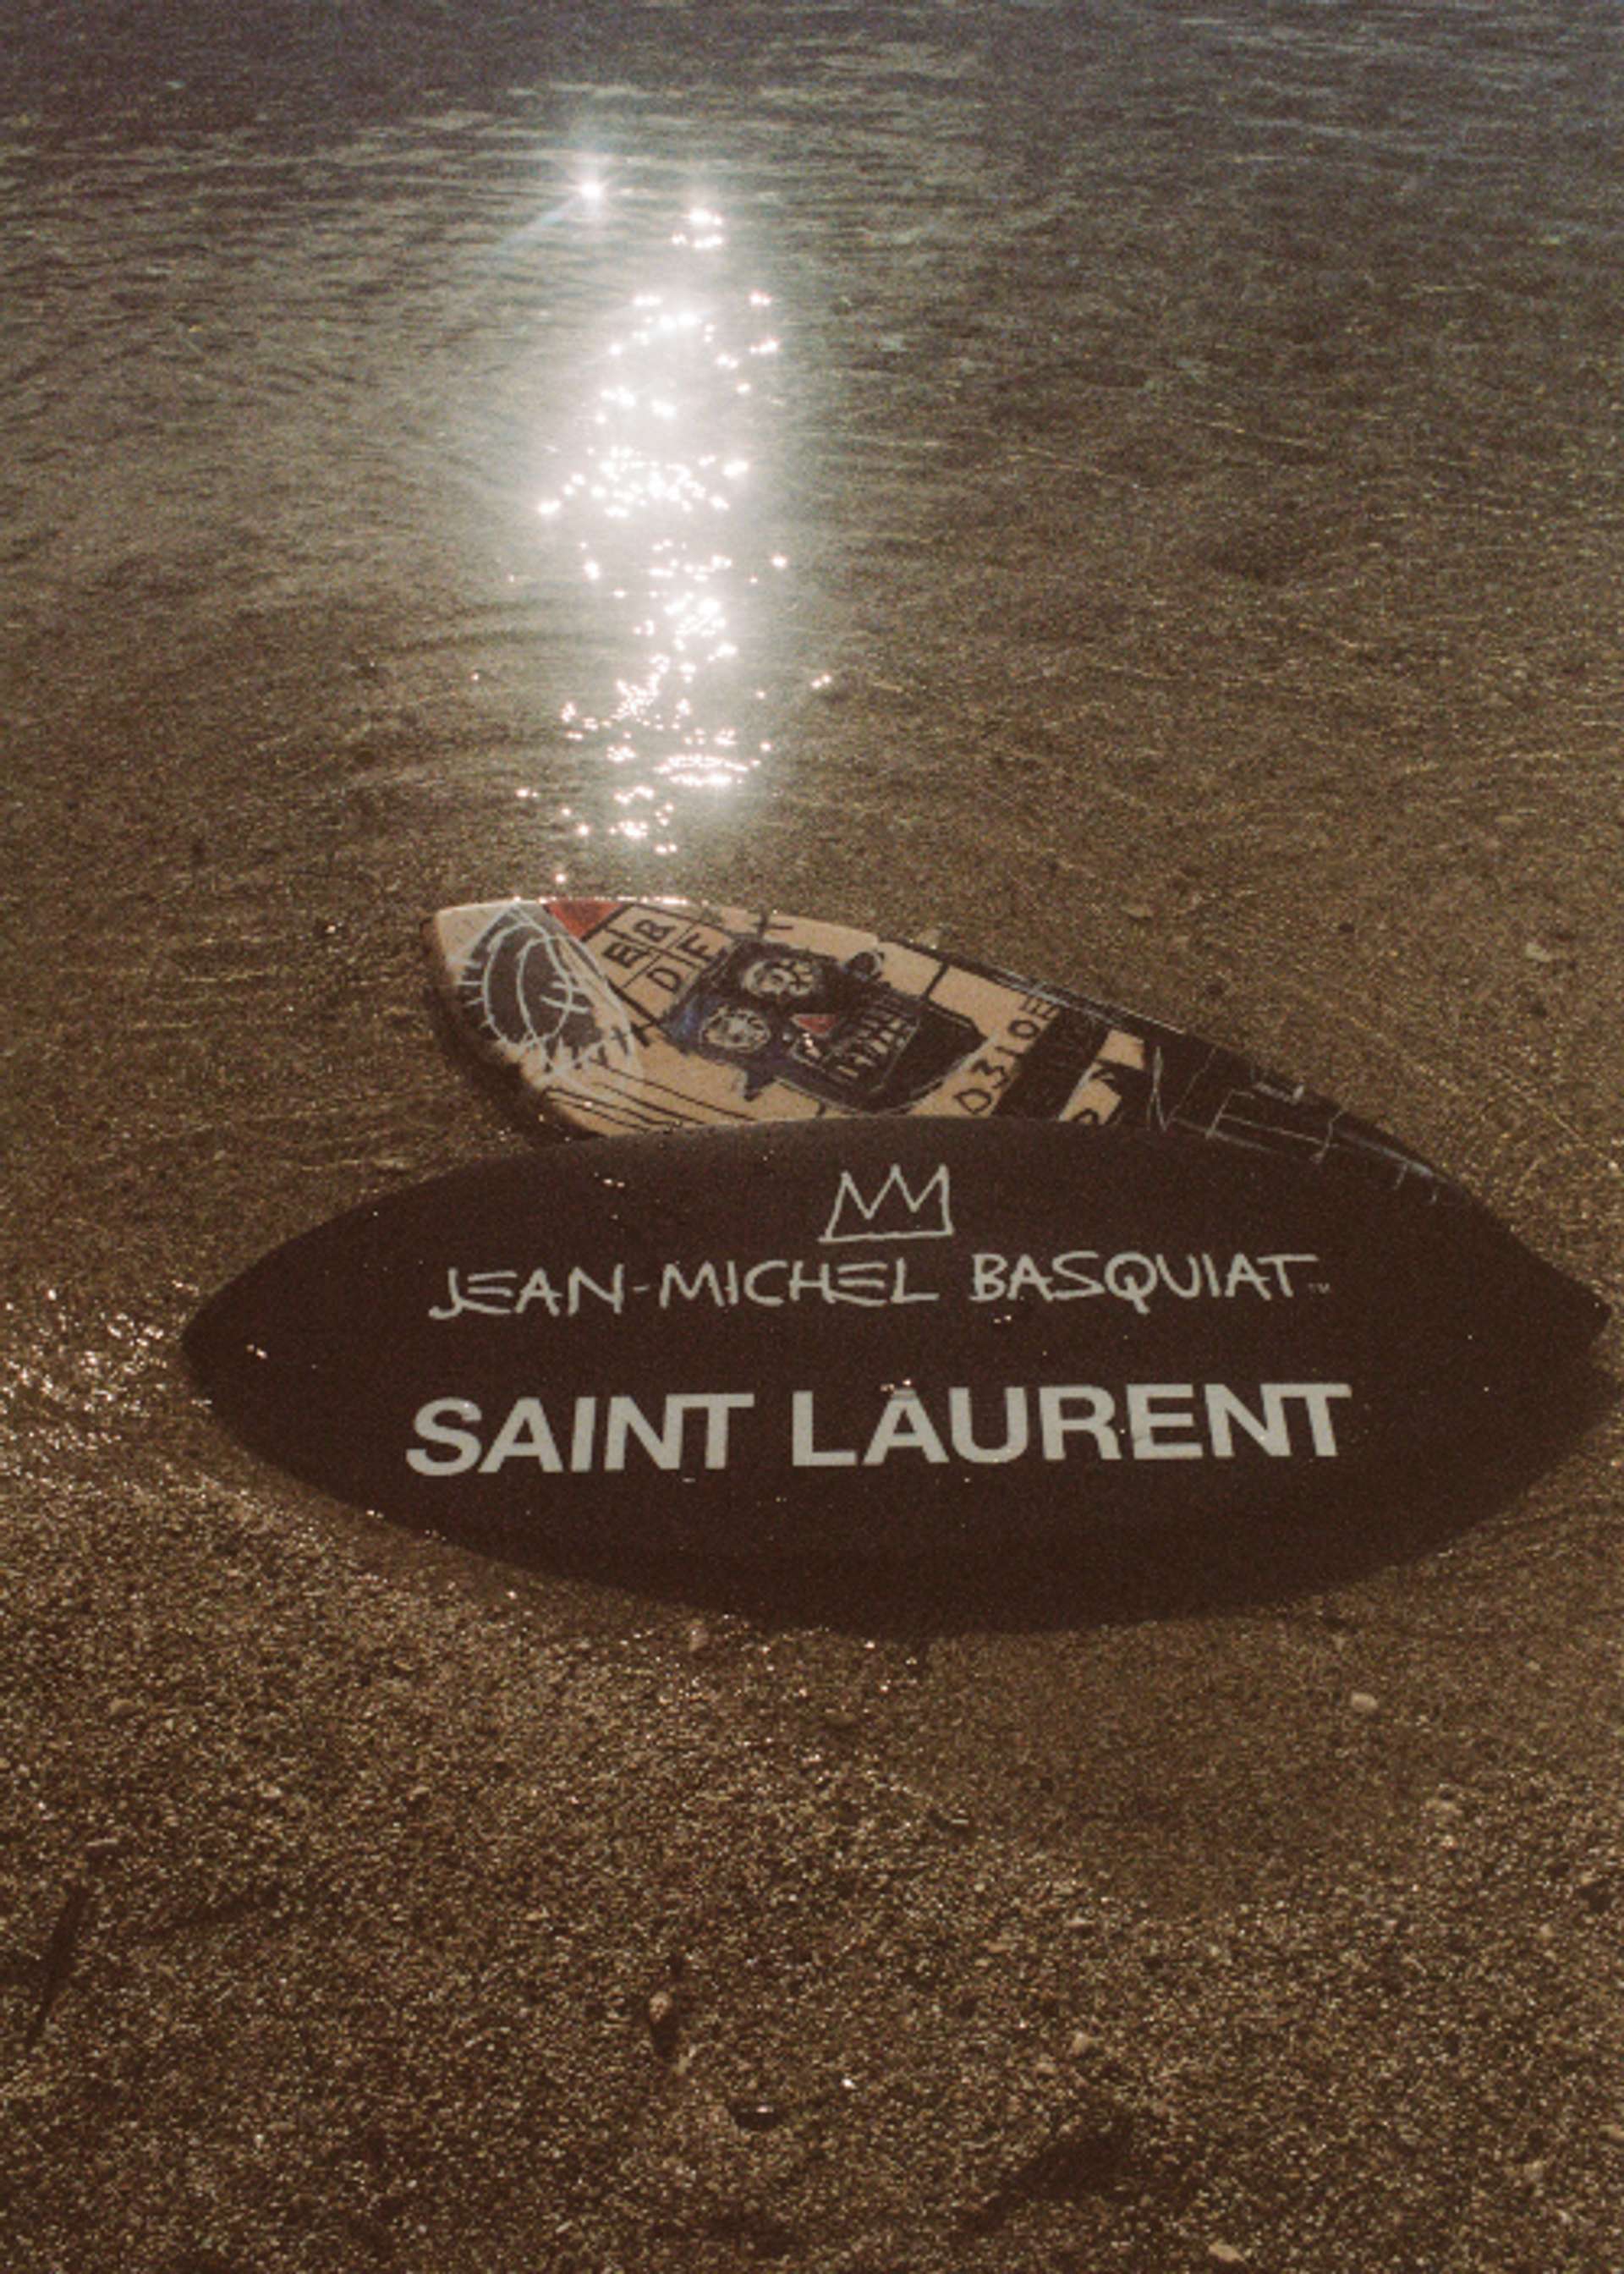 An image of two skimboards lying in the sand, each showing one side of the item. The top features an artwork by Basquiat, while the bottom of the board has the artist’s name topped by a crown and the Saint Laurent logo.